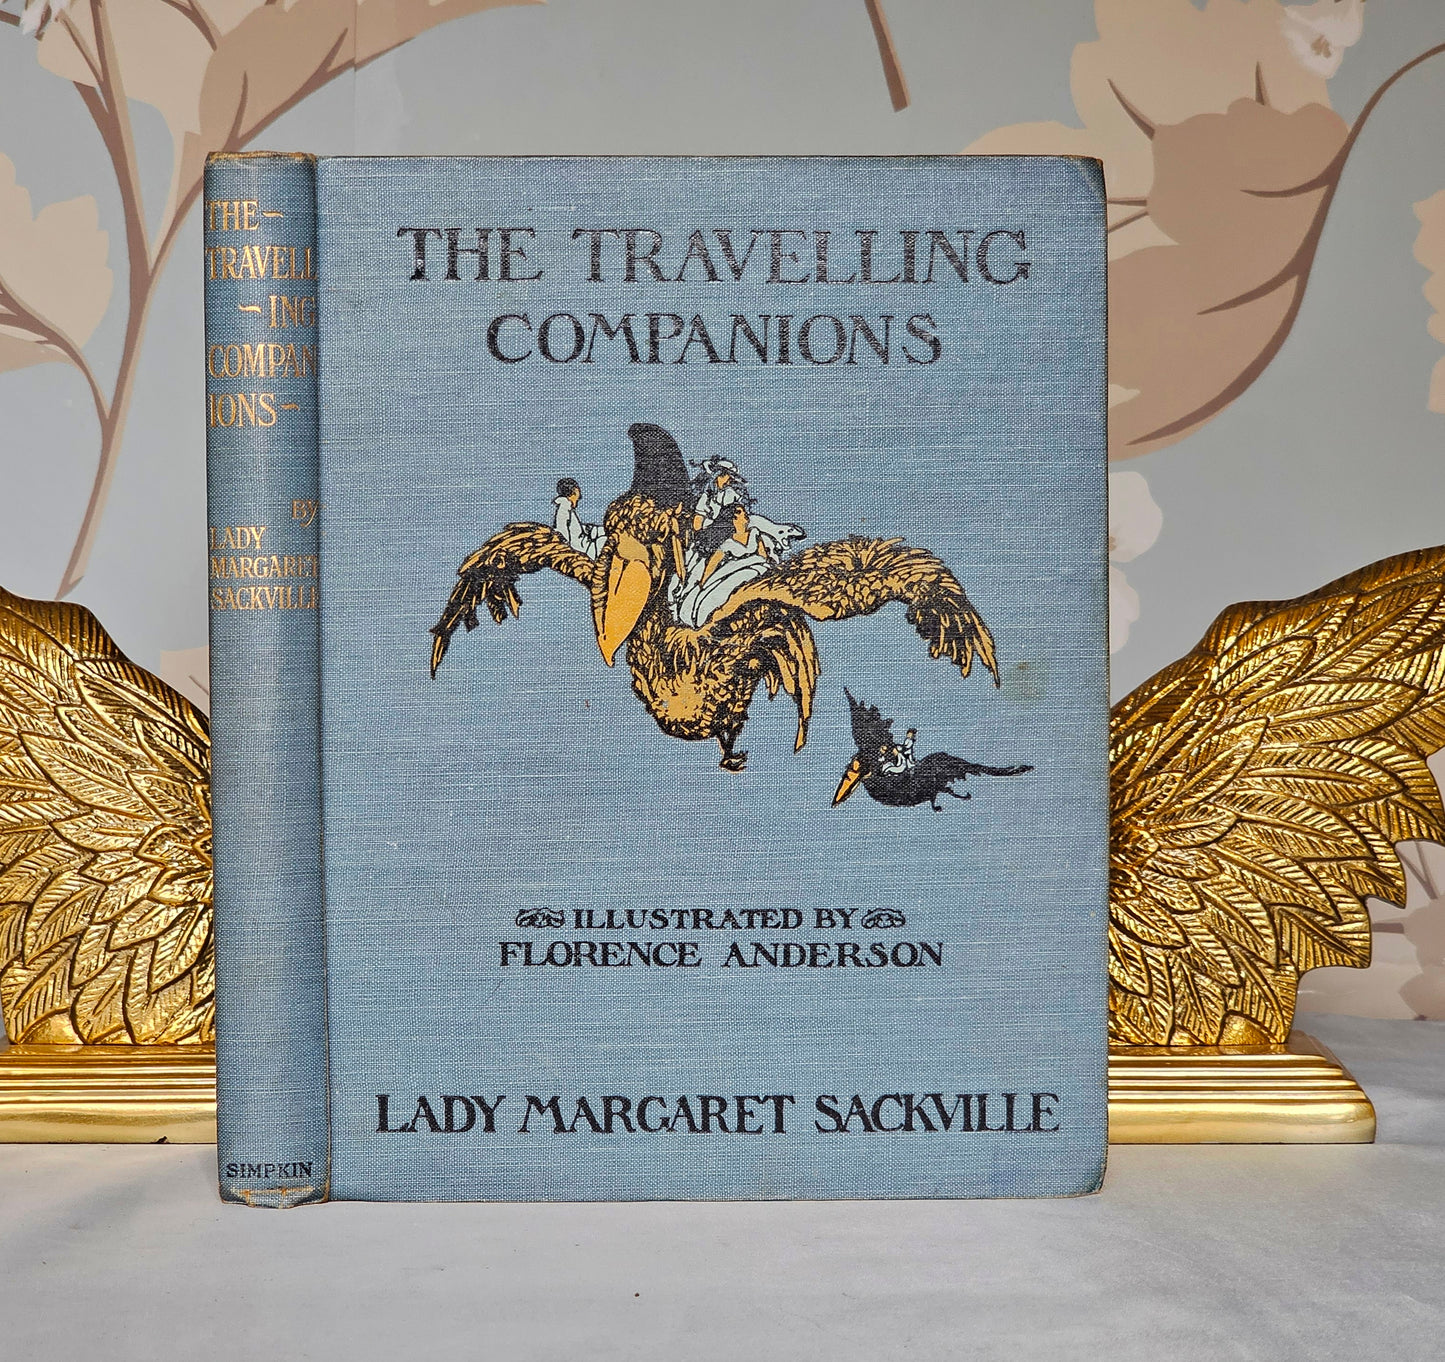 1915 The Travelling Companions And Other Stories For Children by Lady Margaret Sackville / 1st Florence Anderson Edition / 12 Colour Plates